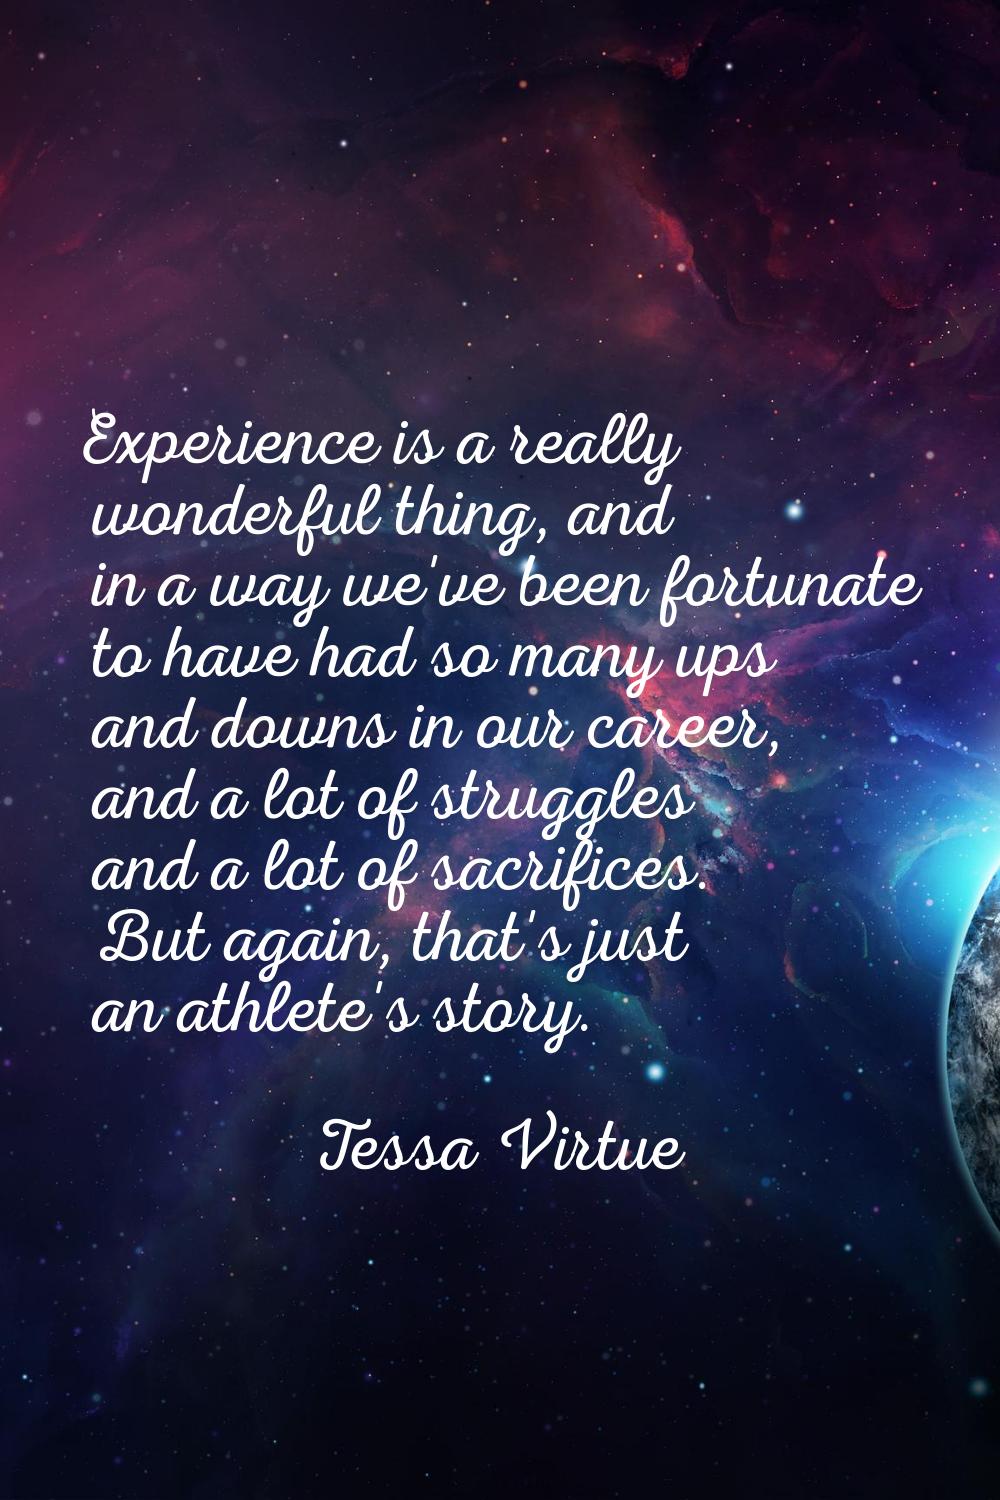 Experience is a really wonderful thing, and in a way we've been fortunate to have had so many ups a